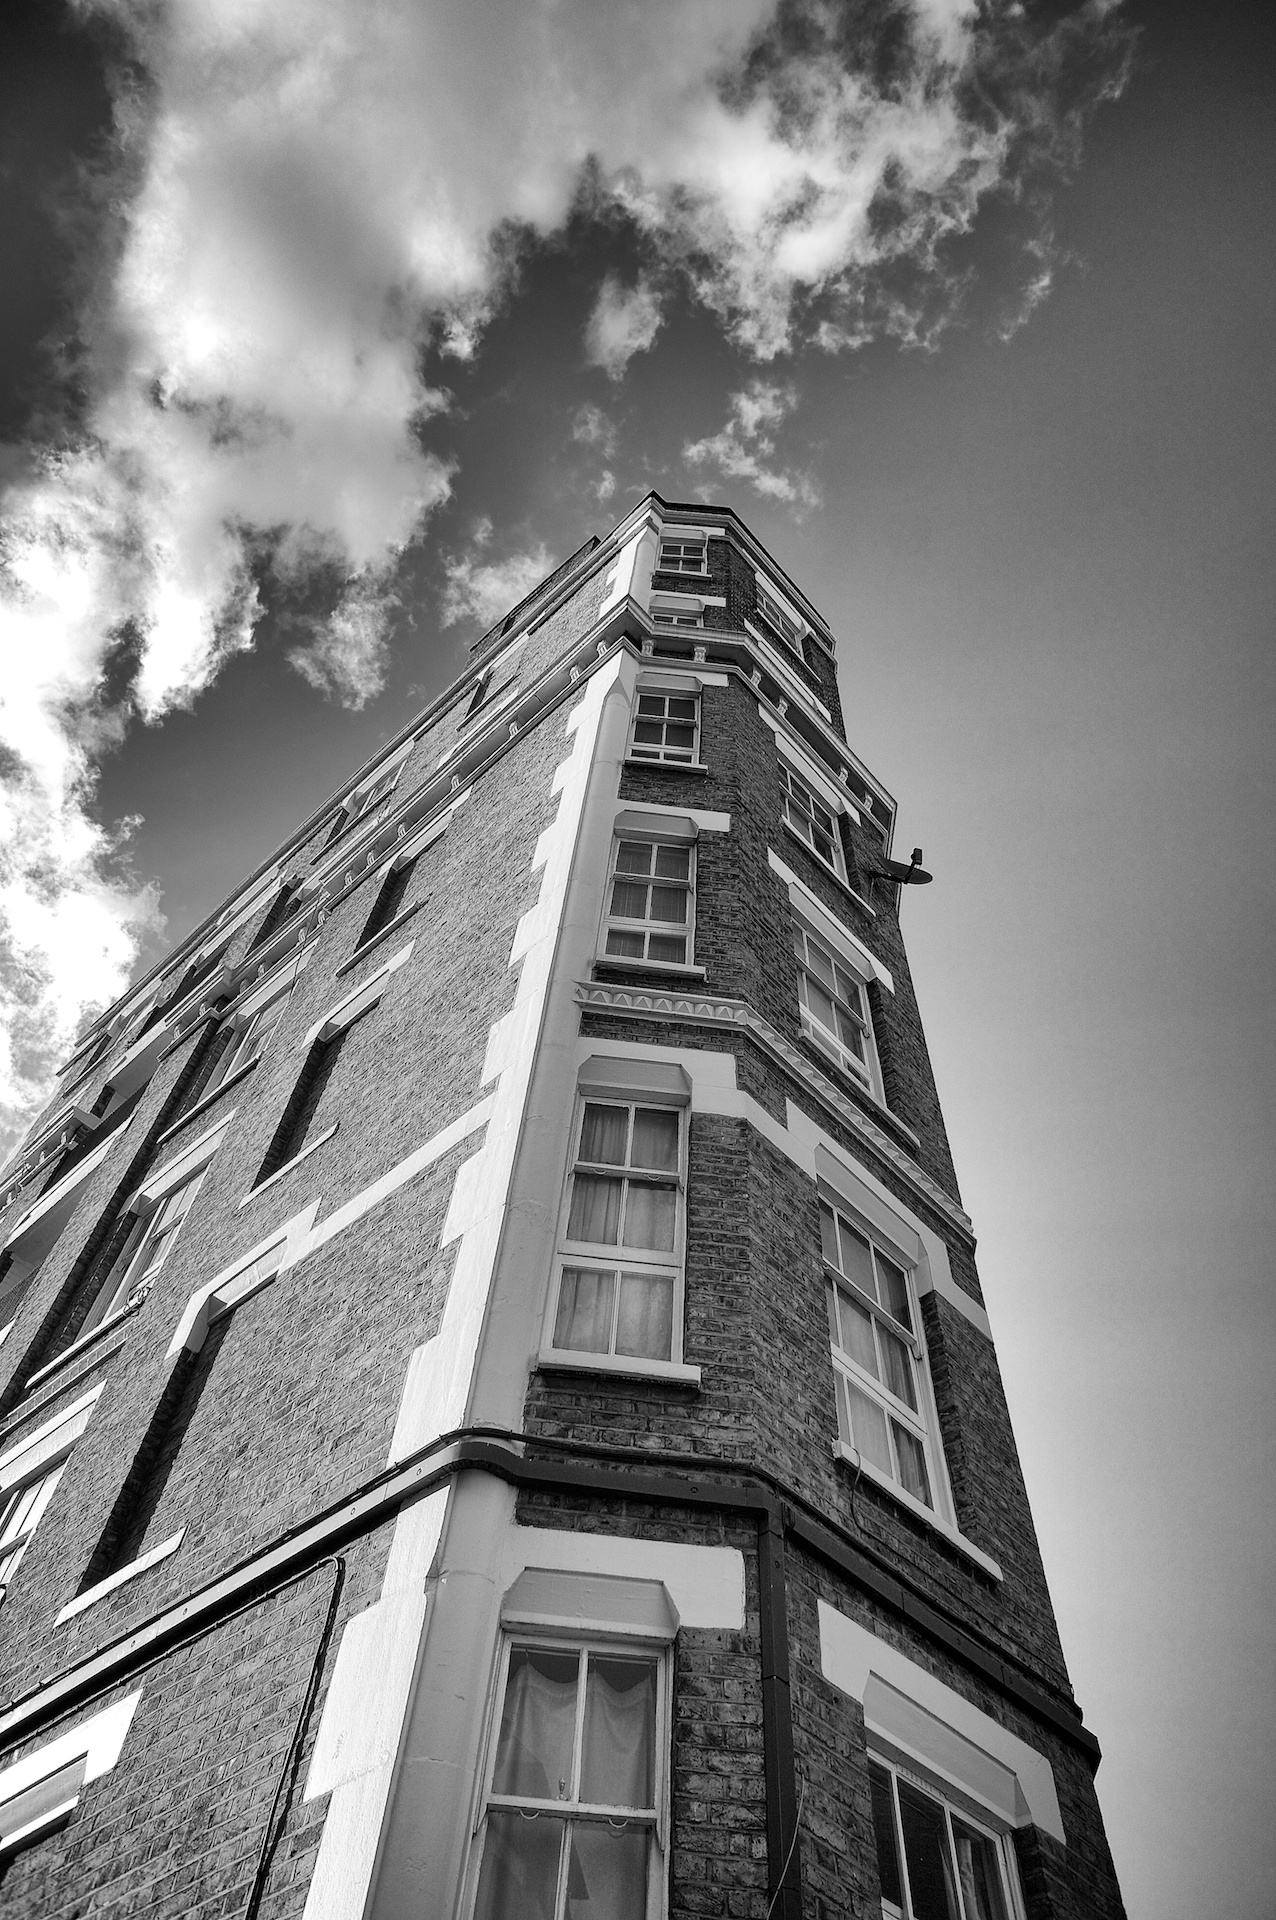 an upward black and white s of an old brick tower